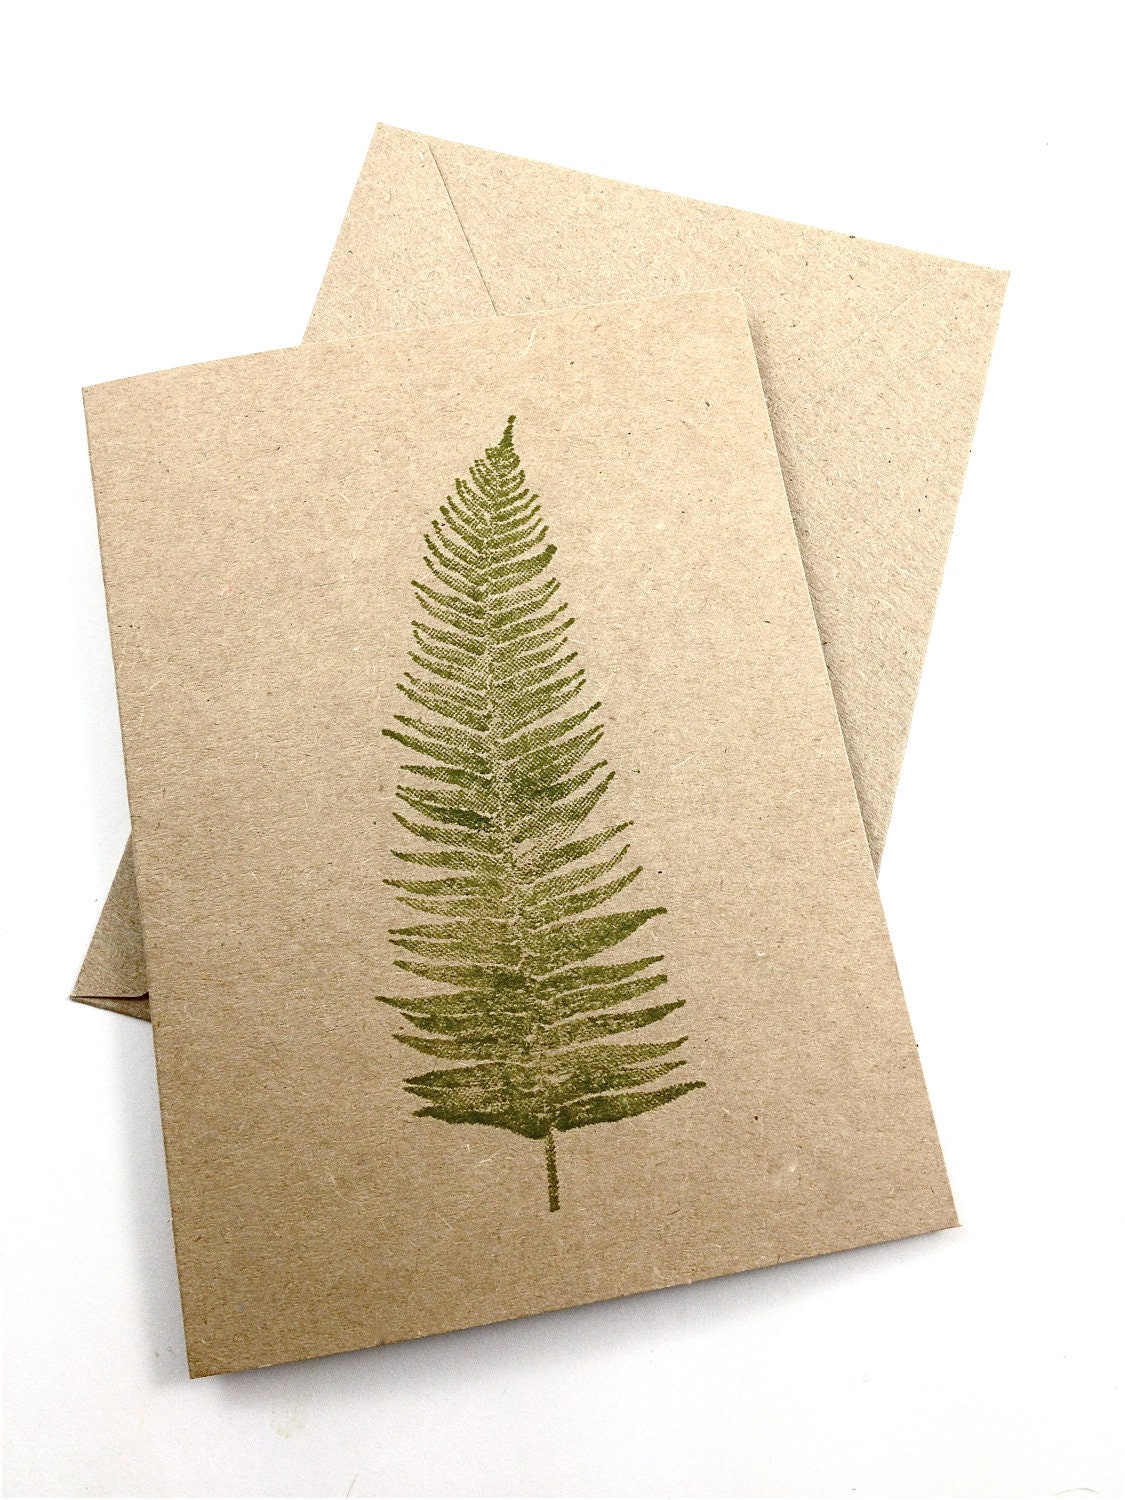 Note Cards - Gift Cards - Hand Printed Brown Kraft Card Stock - Fern - Set of 5 - everydaysaholiday